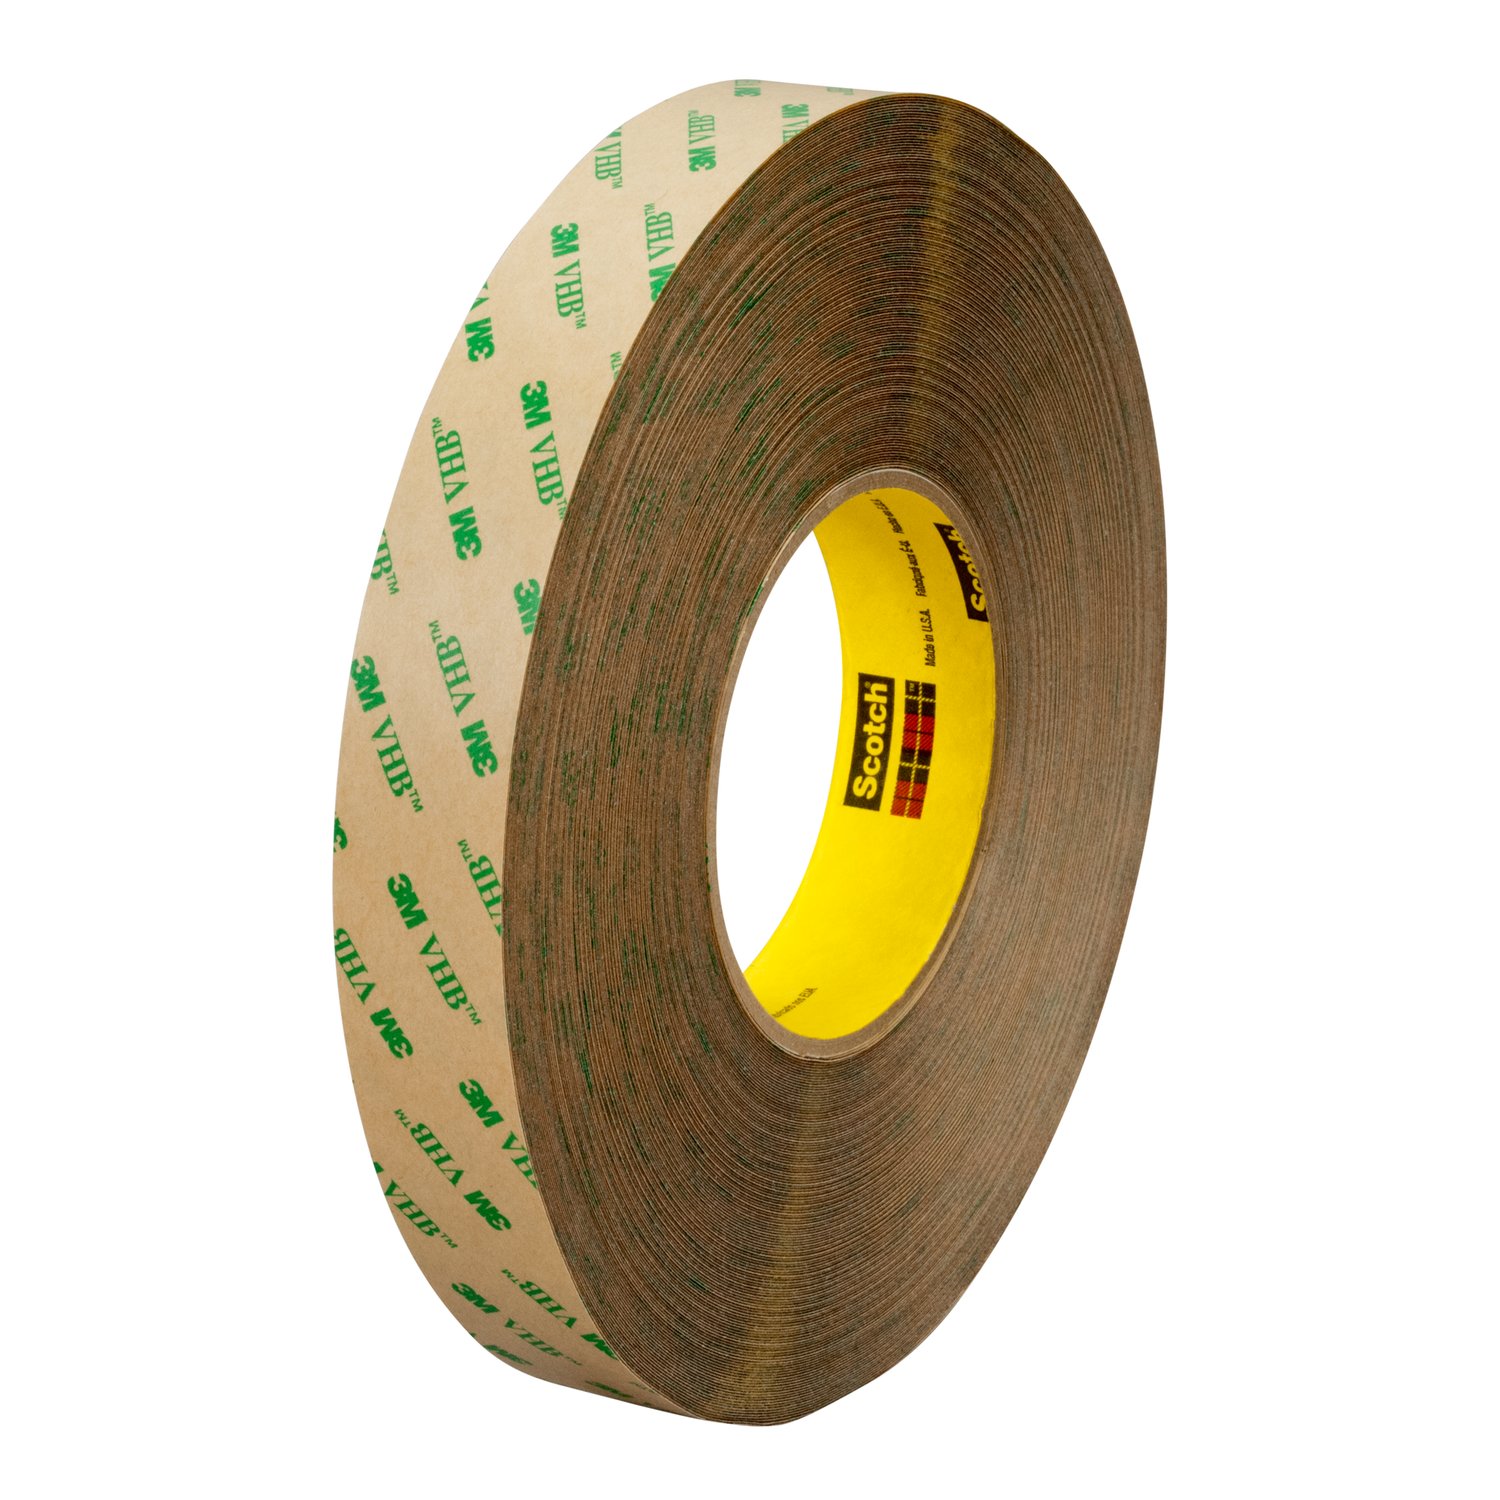 7010373865 - 3M Adhesive Transfer Tape 9473PC, Clear, 3/8 in x 60 yd, 10 mil, 24
rolls per case